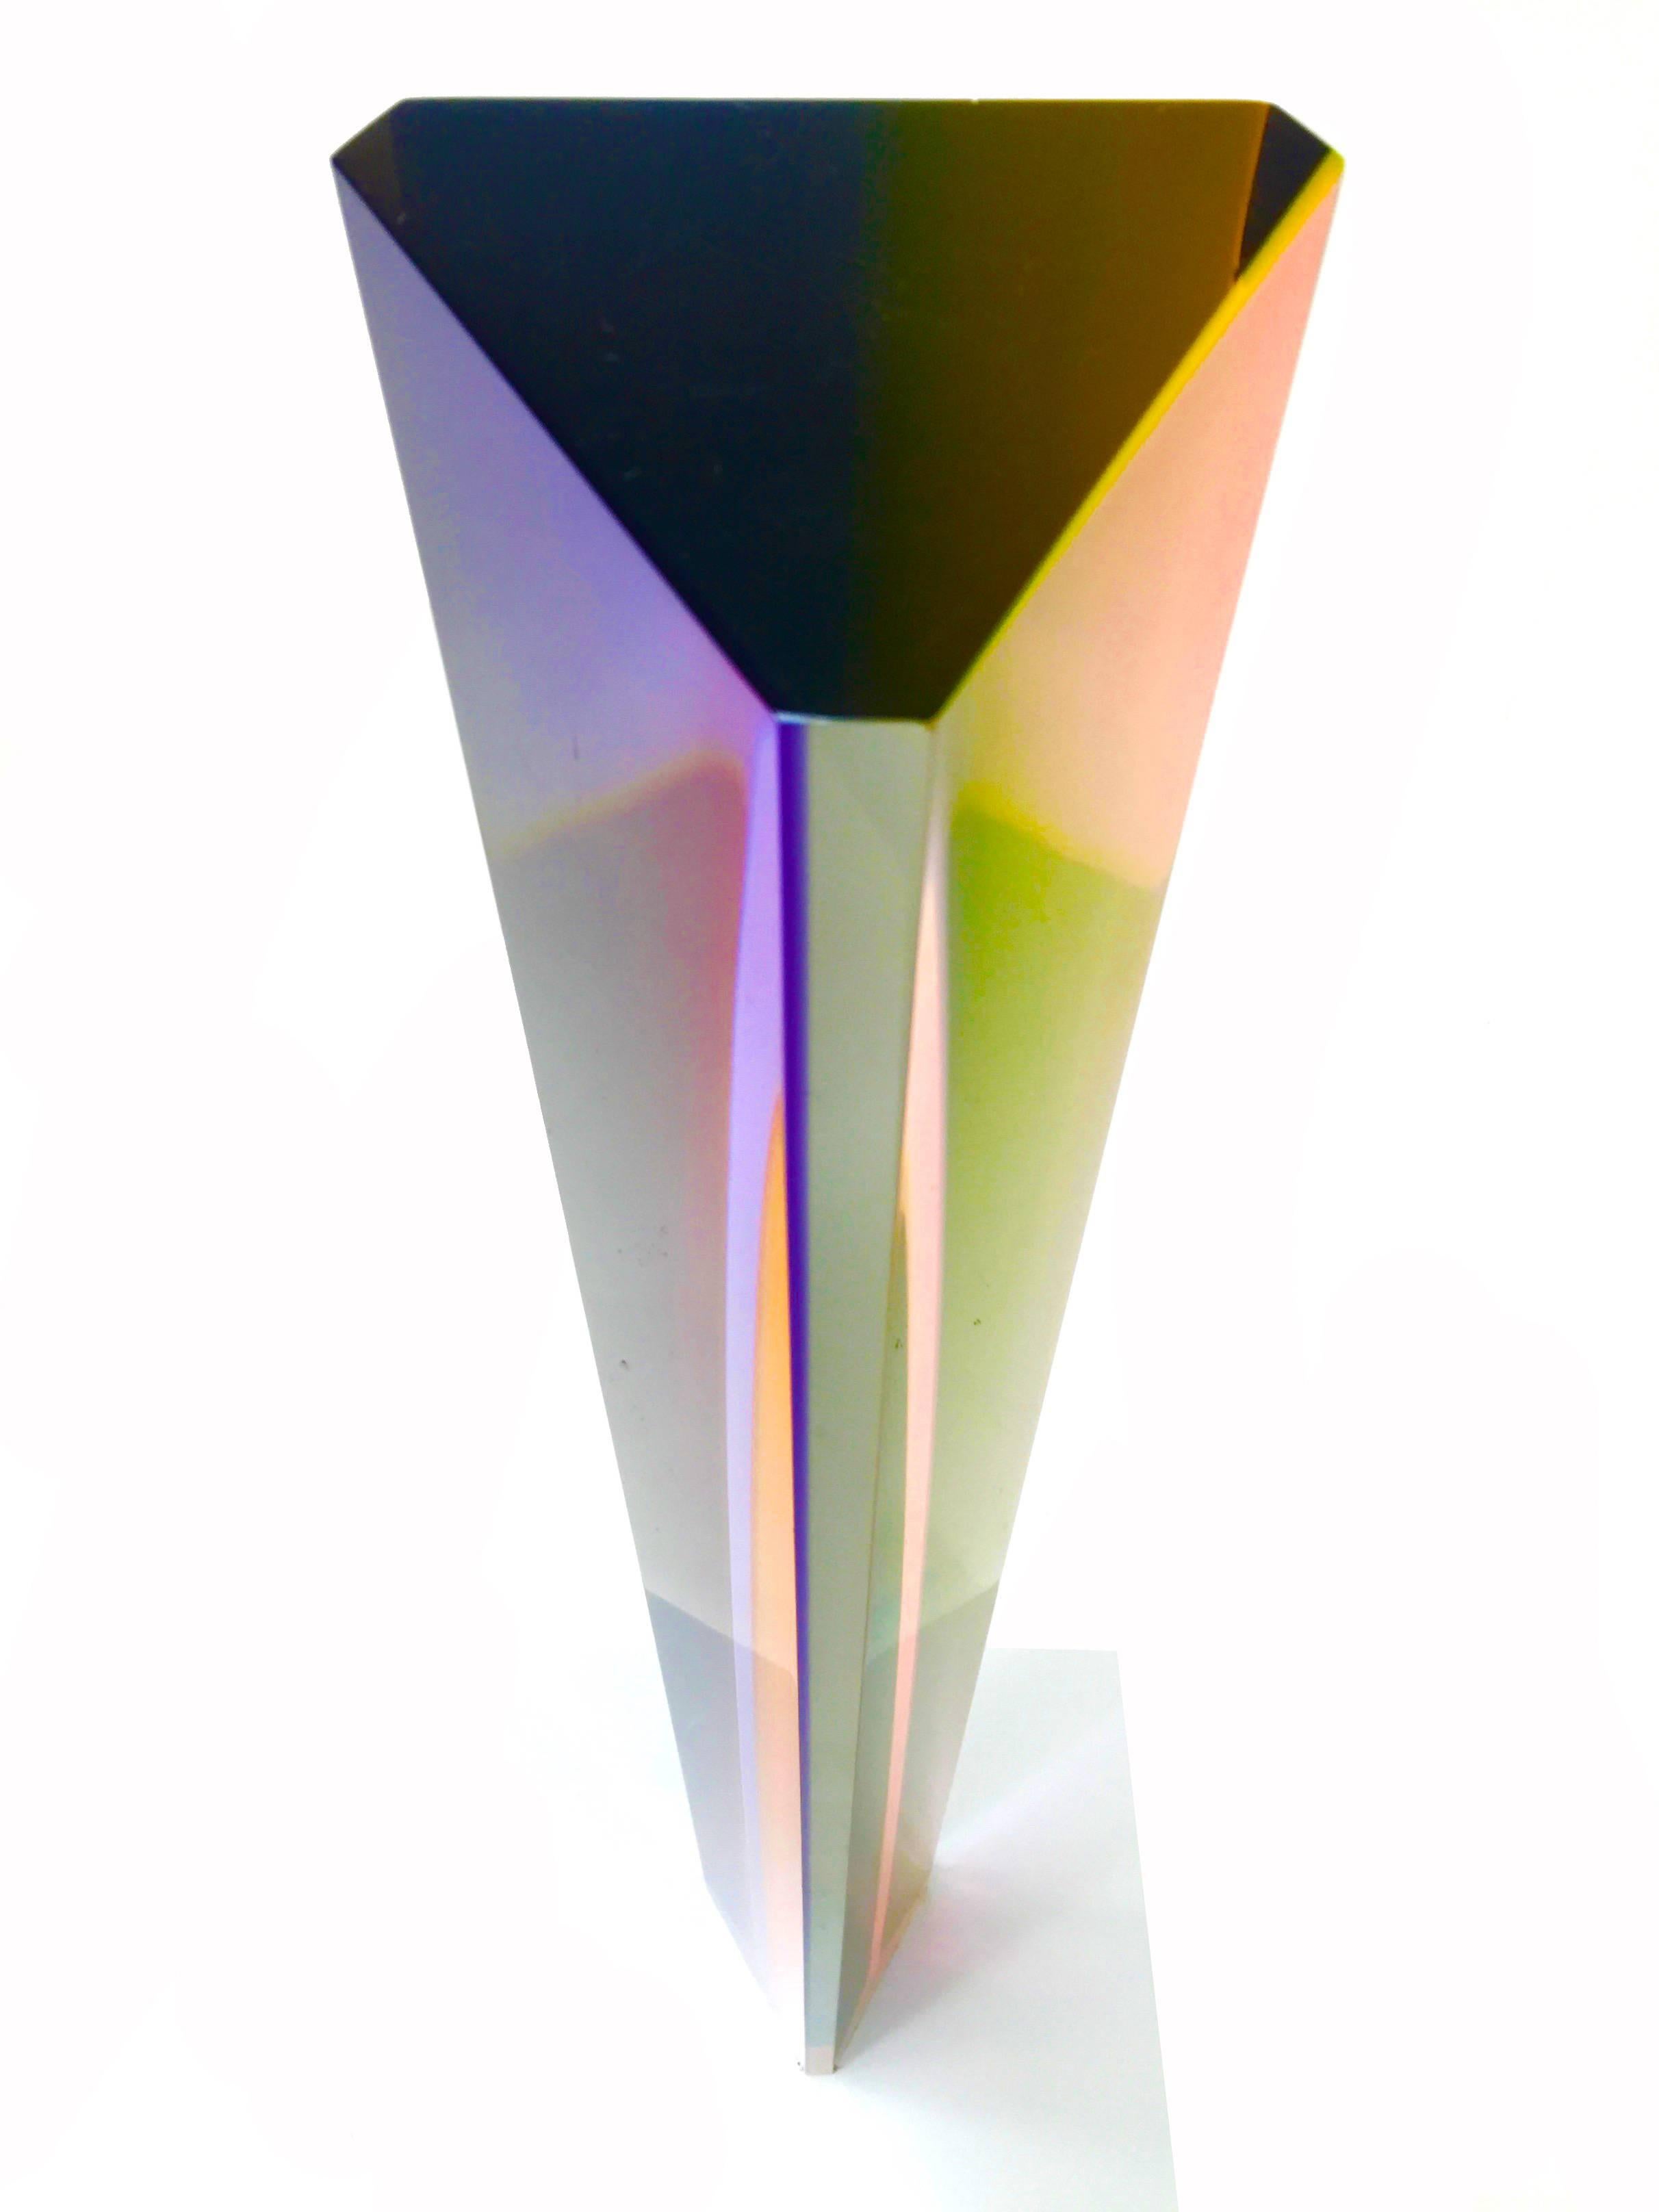 Large and impressive pink, orange, and purple sculpture by the renowned light and color refraction theorist and sculptor Vasa Velizar Mihich. Yugoslavian born and currently working and living in L.A. This piece is numbered "2040" and is a